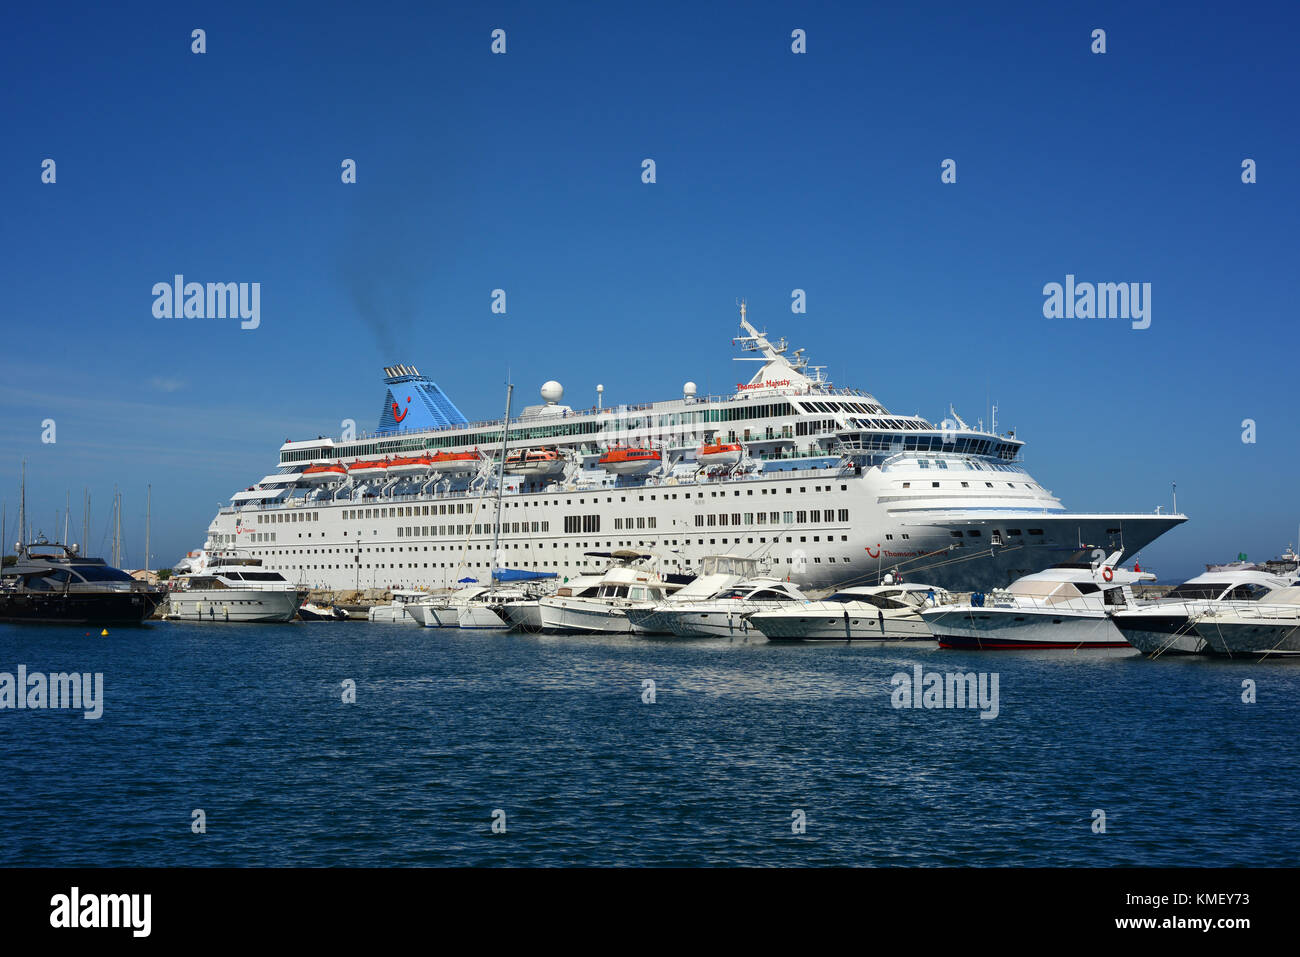 Cruise ship Thomson Majesty in the port of Propriano, Sicily, France Stock Photo